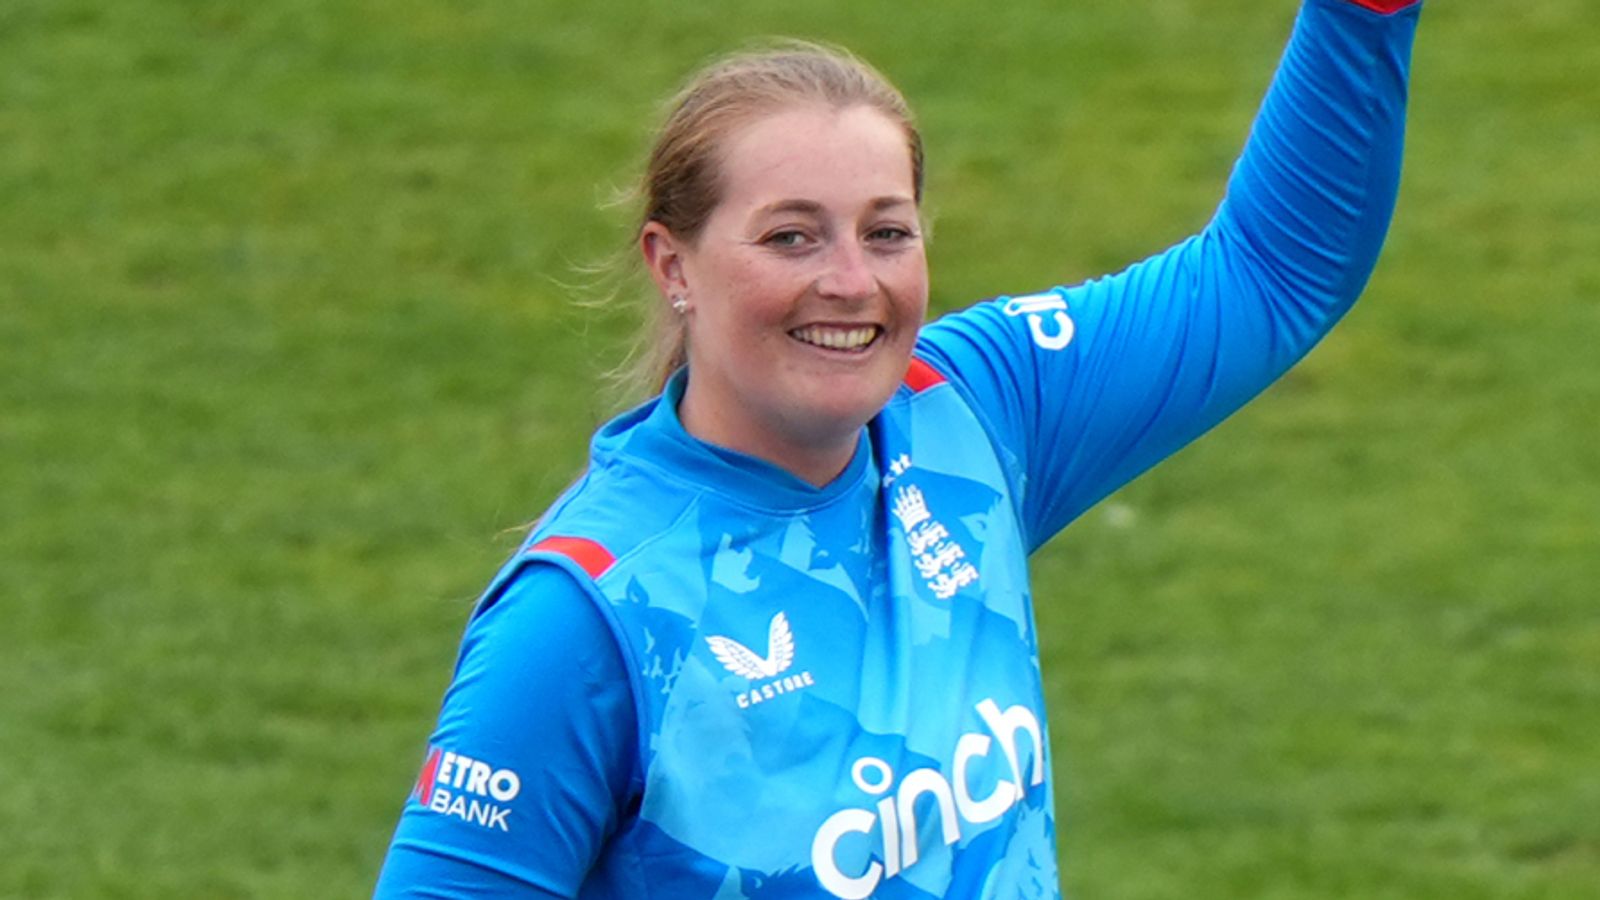 England vs Pakistan: Spinner Sophie Ecclestone on brink of becoming fastest player to take 100 ODI wickets | Cricket News